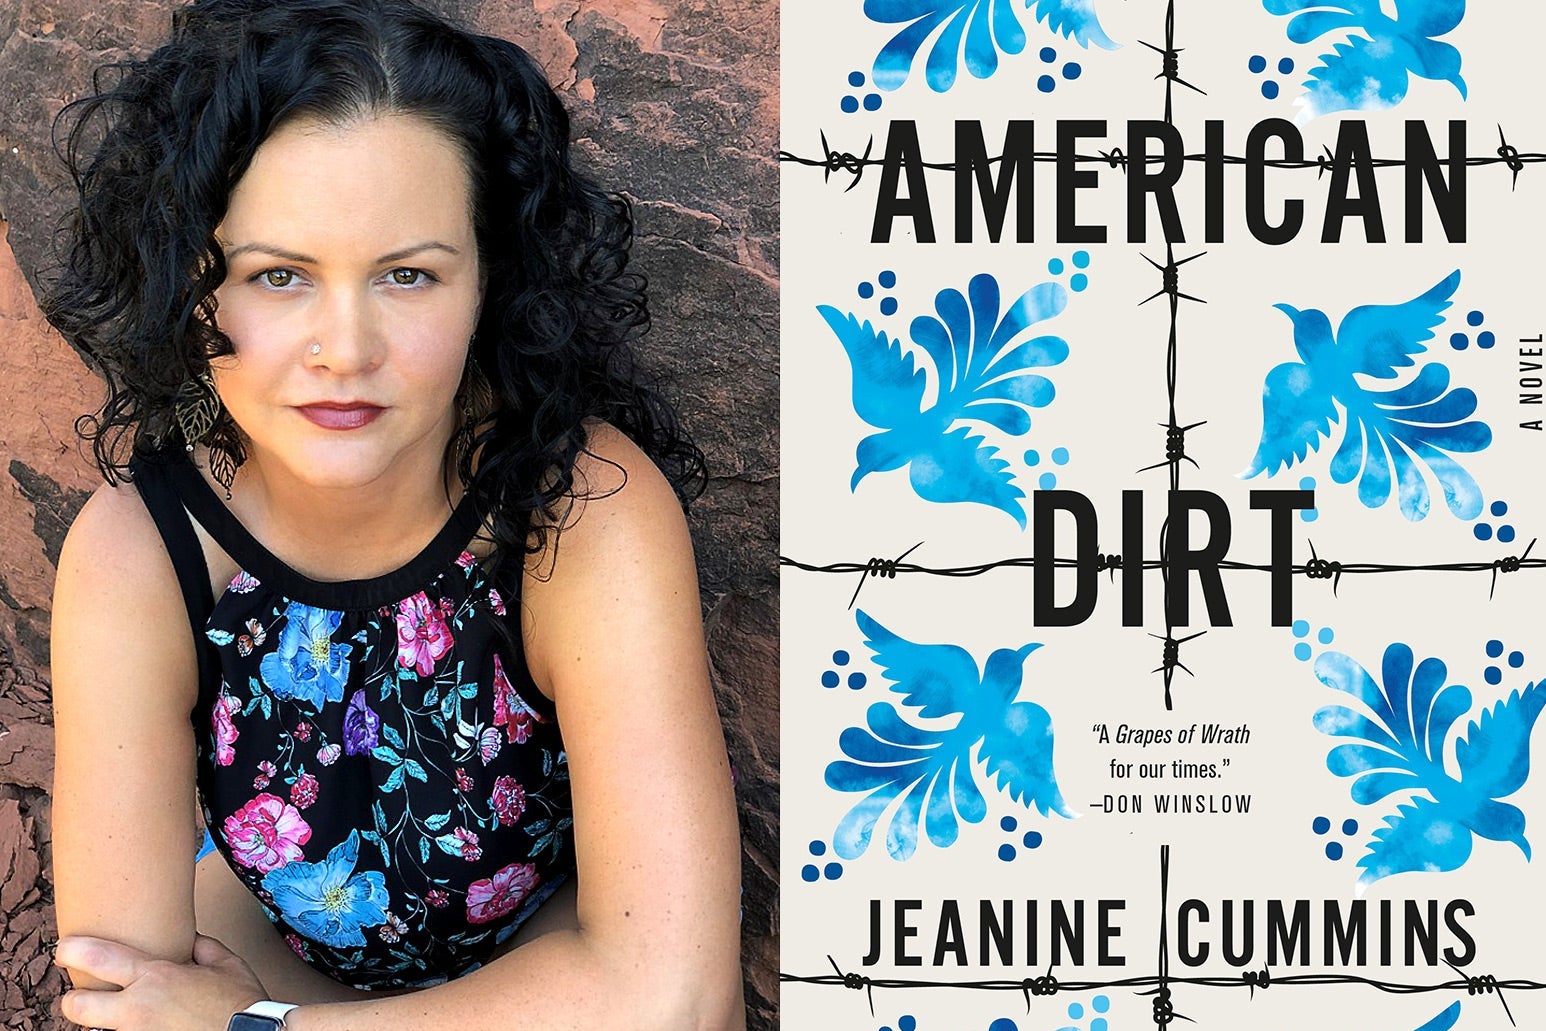 A headshot of Jeanine Cummins next to the cover of American Dirt.